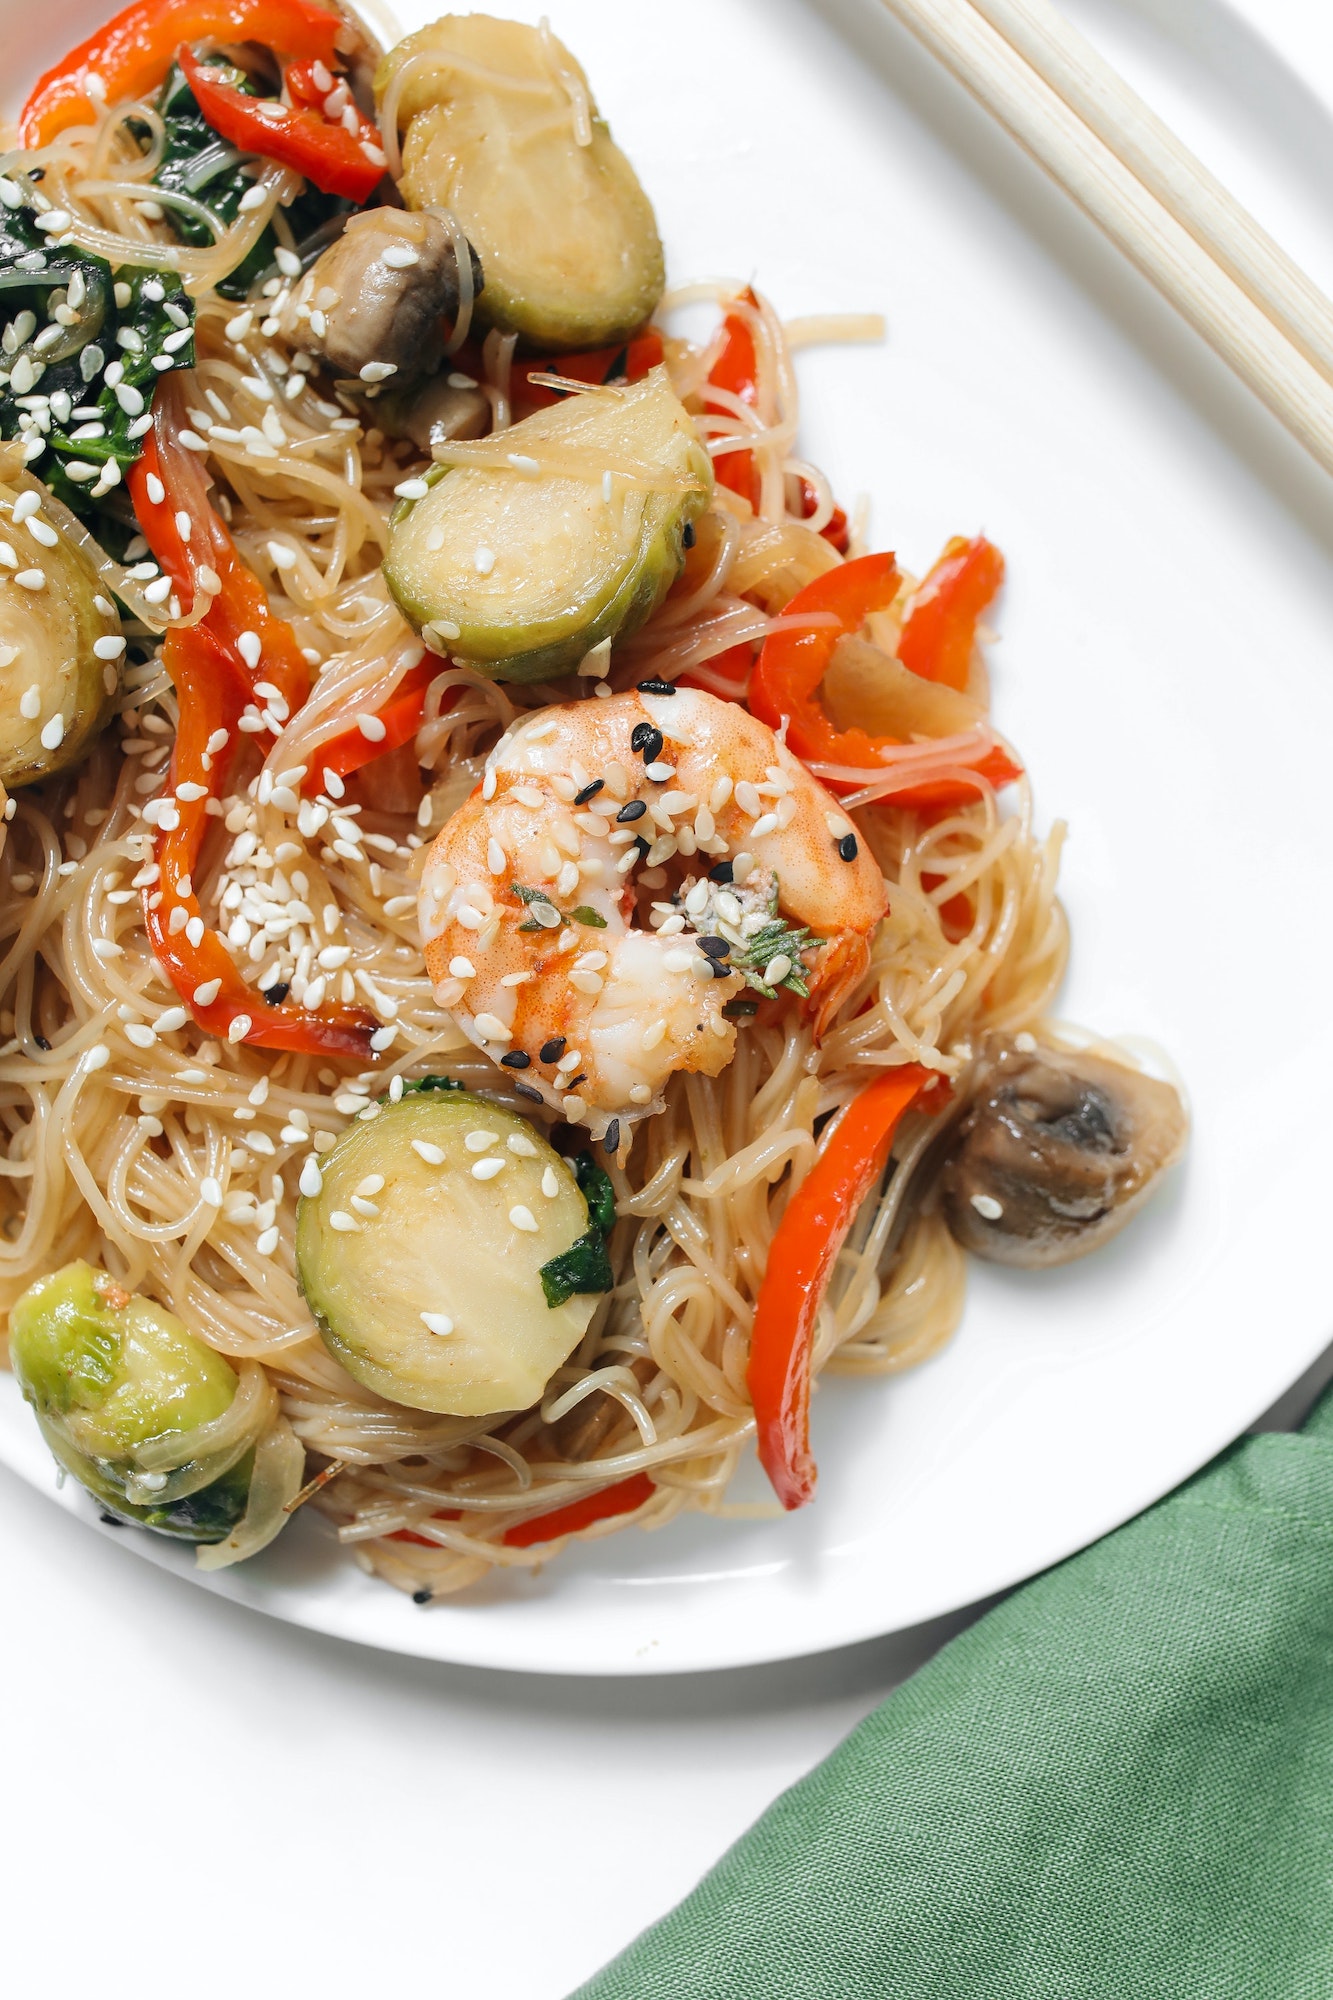 Adding noodle options to the menu enables a restaurant to cater to different preferences and lifestyles